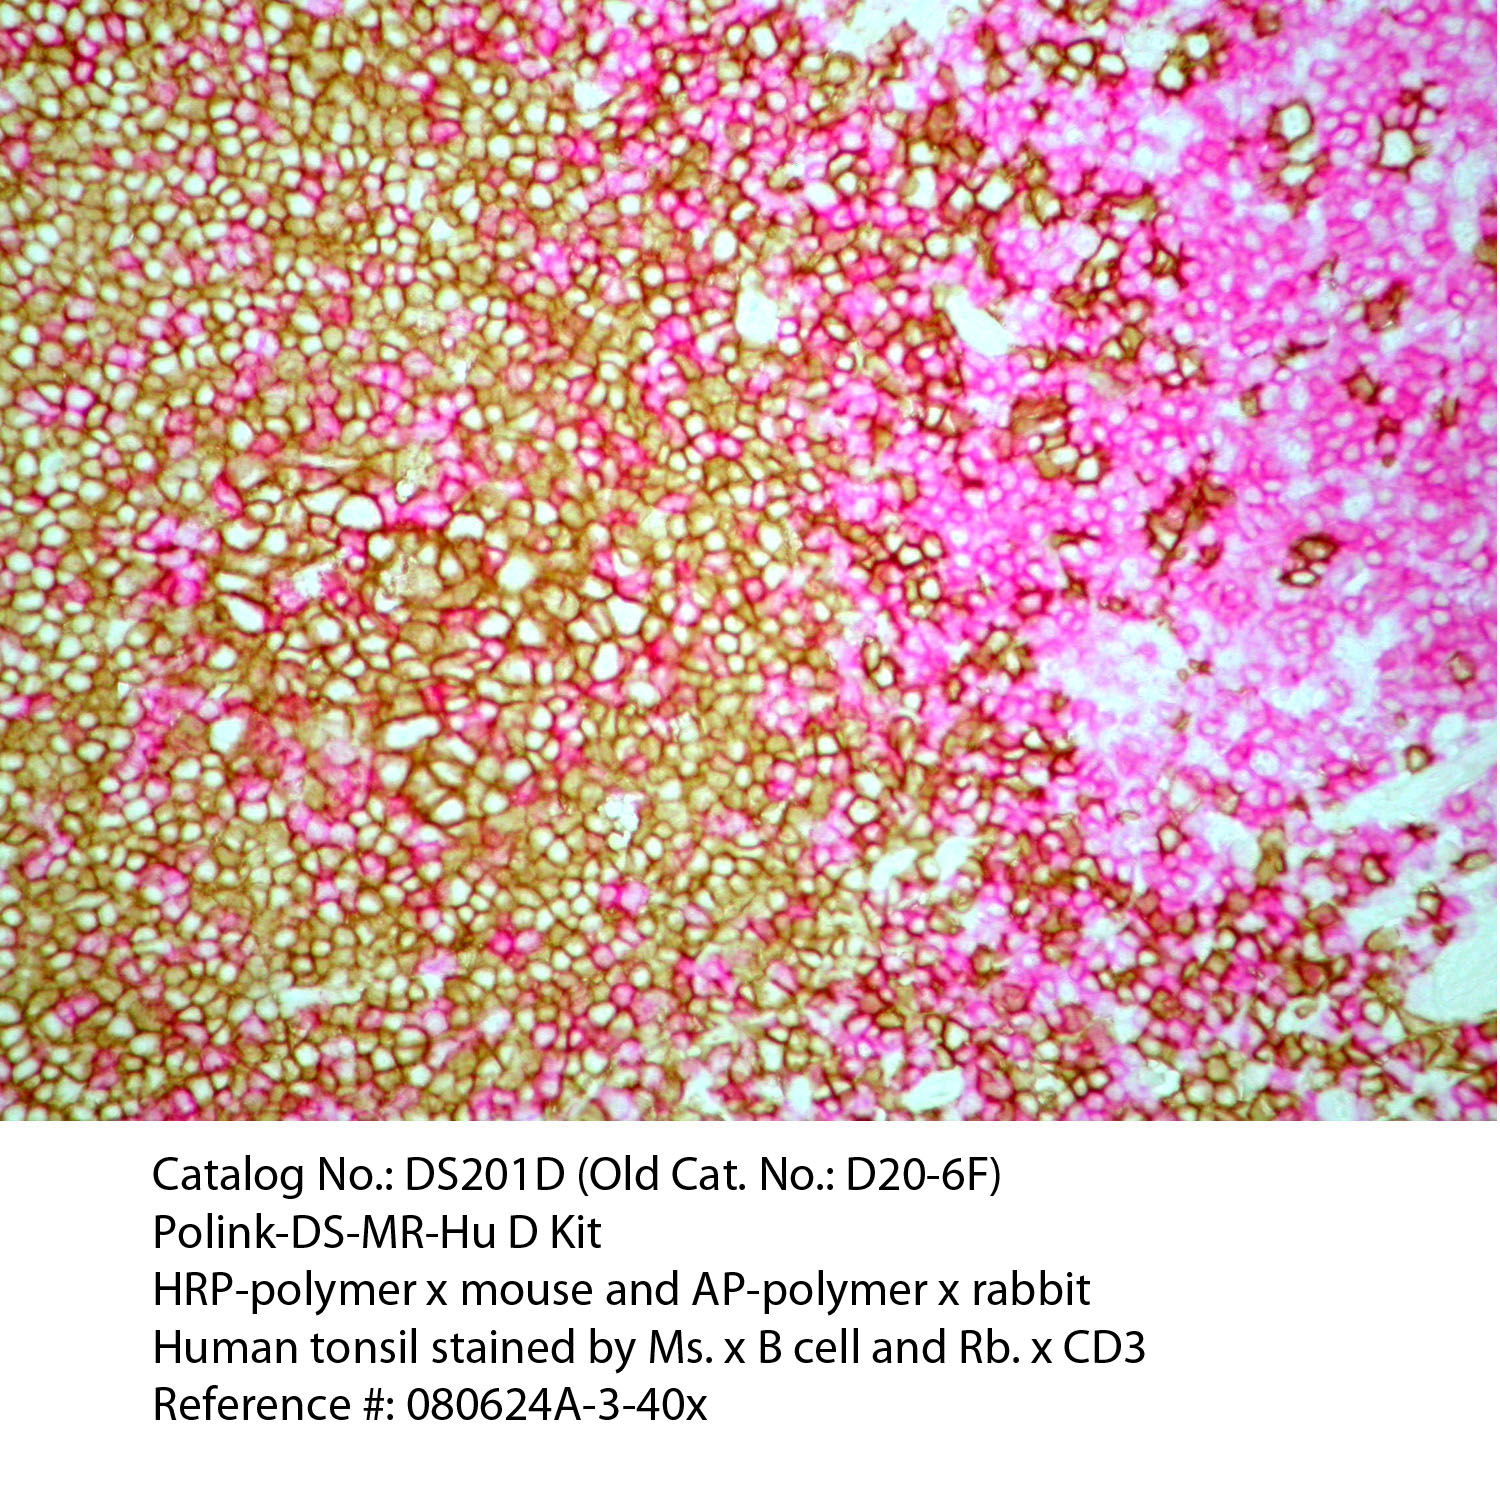 IHC staining of FFPE human tonsil tissue within normal limits using mouse anti-B cell and rabbit anti-CD3 polyclonal antibodies and Polink DS-MR-Hu A1 detection kit [DS201A-18]. The red (Rabbit anti-CD3) and brown (Mouse anti-B cell) stain indicate positive stain and blue background is the counter stain. It is mounted using a permanent aqueous mounting medium [E03-18].